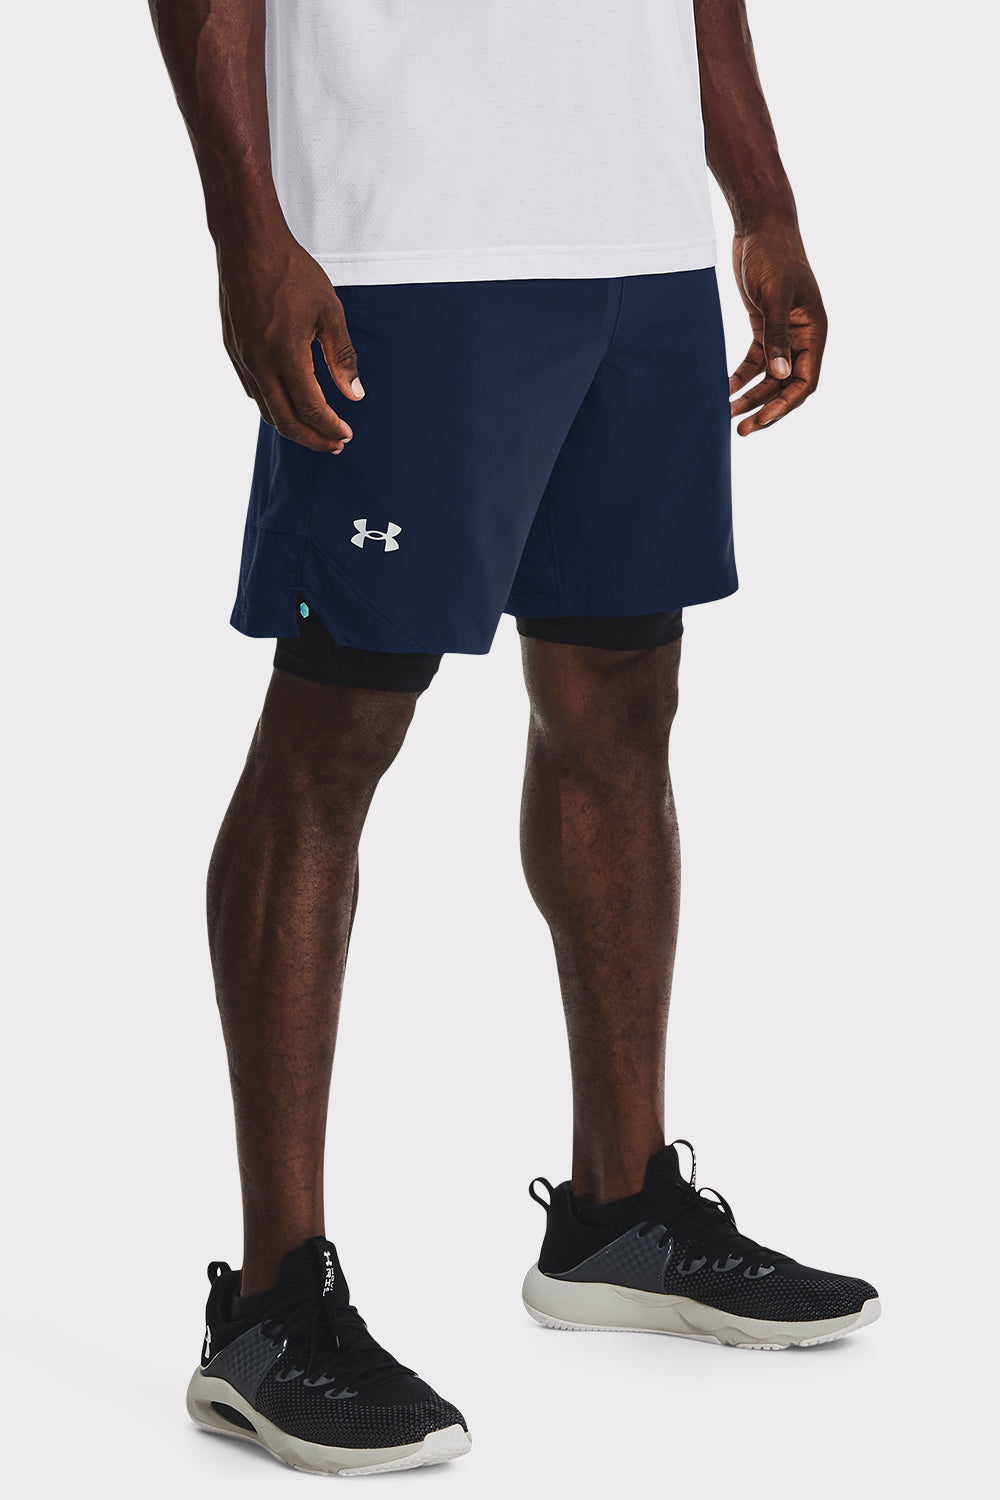 Under Armour UA Vanish Woven 8in Shorts - Academy Blue / XL Shorts